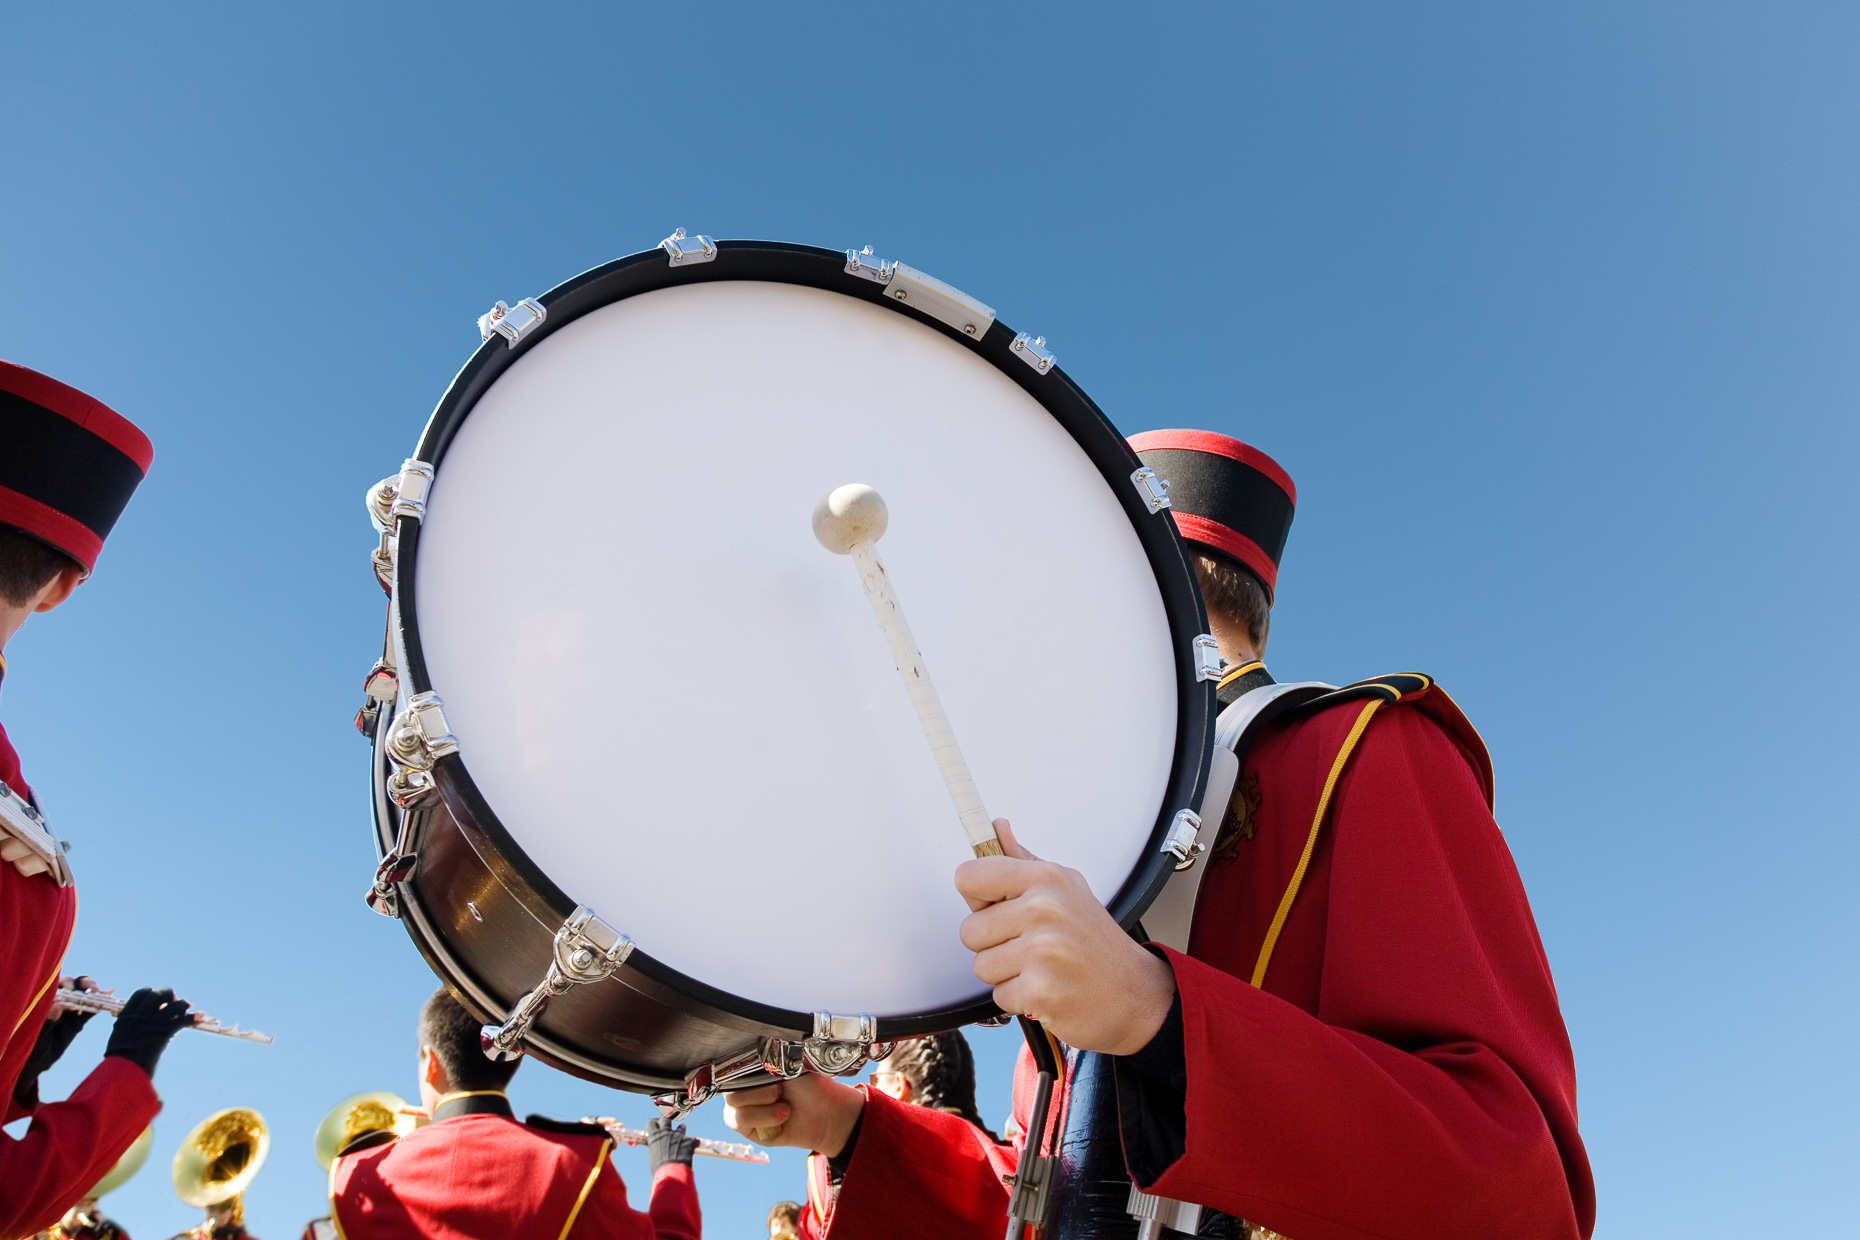 Bass Drum Of Marching Band Being Held By Band Member In Uniform Against Blue Sky By David Zaitz 8662